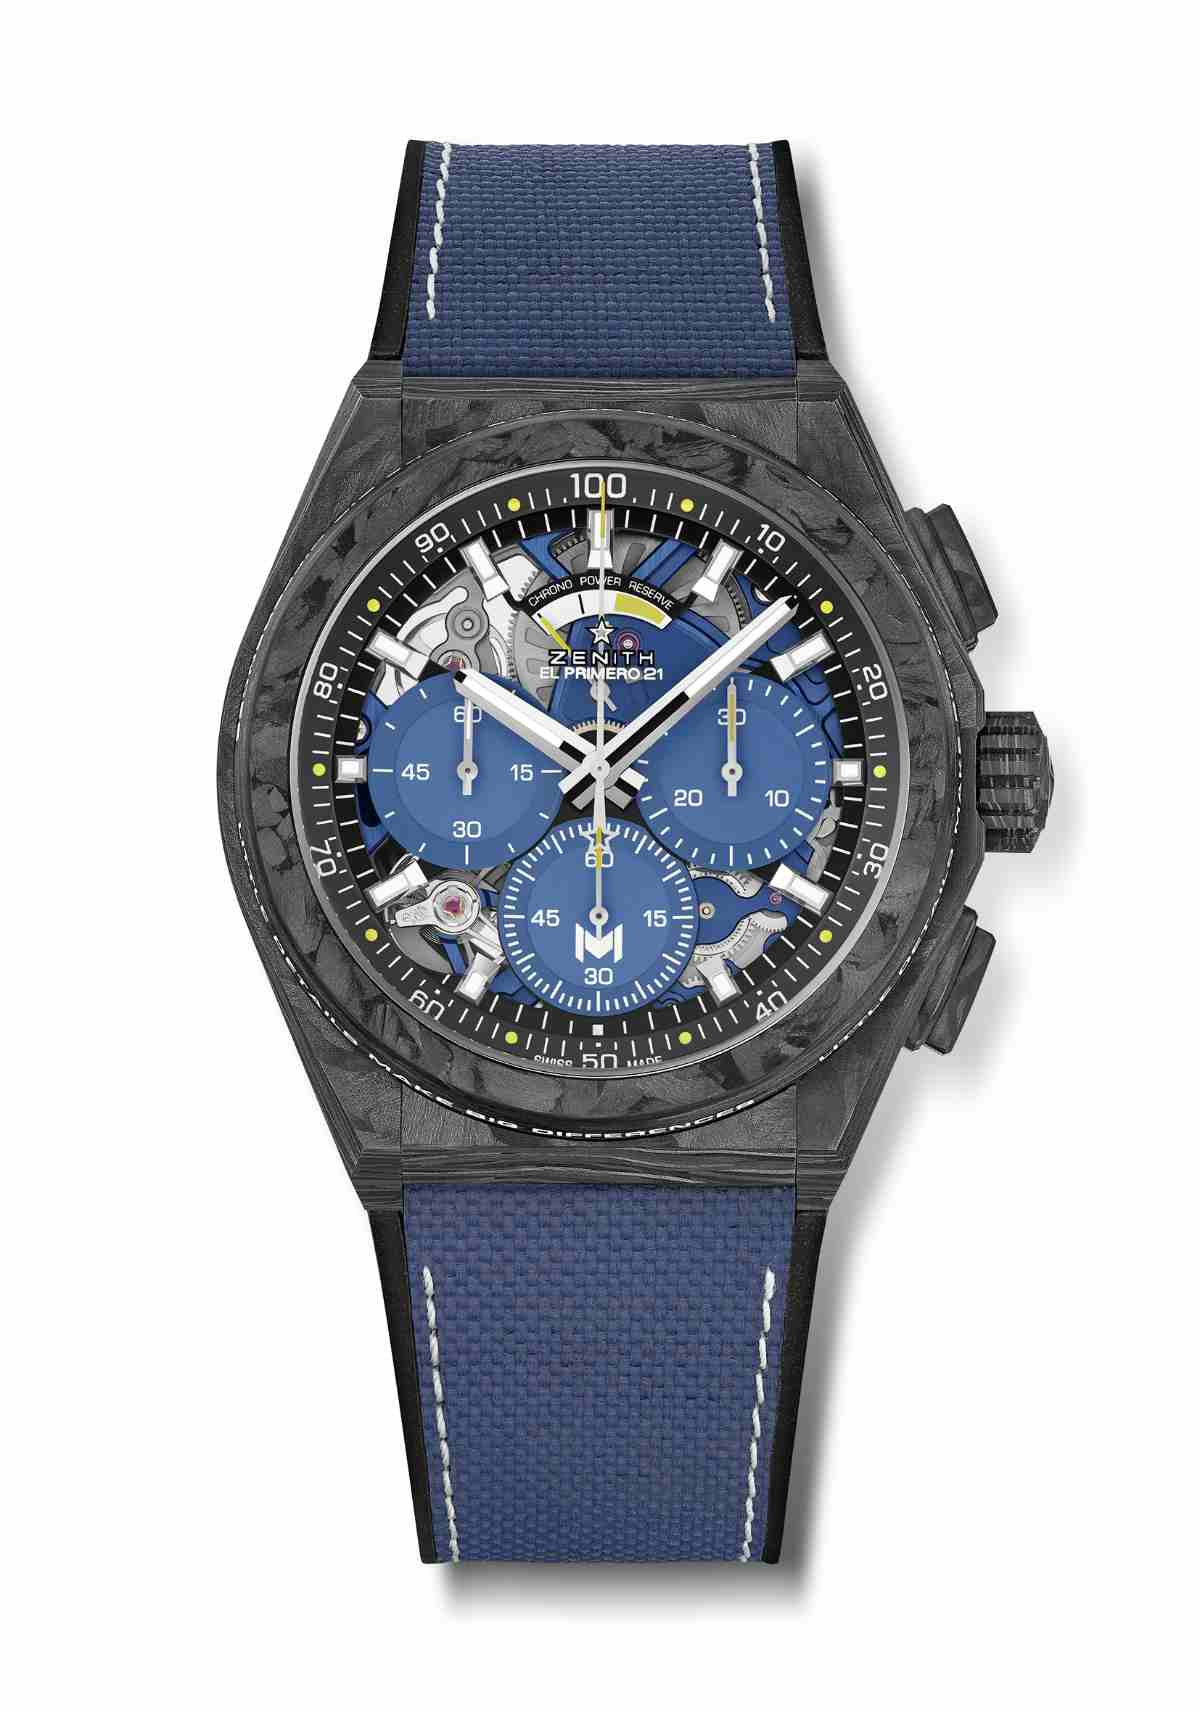 Zenith celebrates friend of the brand Patrick Mouratoglou's ultimate tennis showdown with his own special edition of the Defy 21